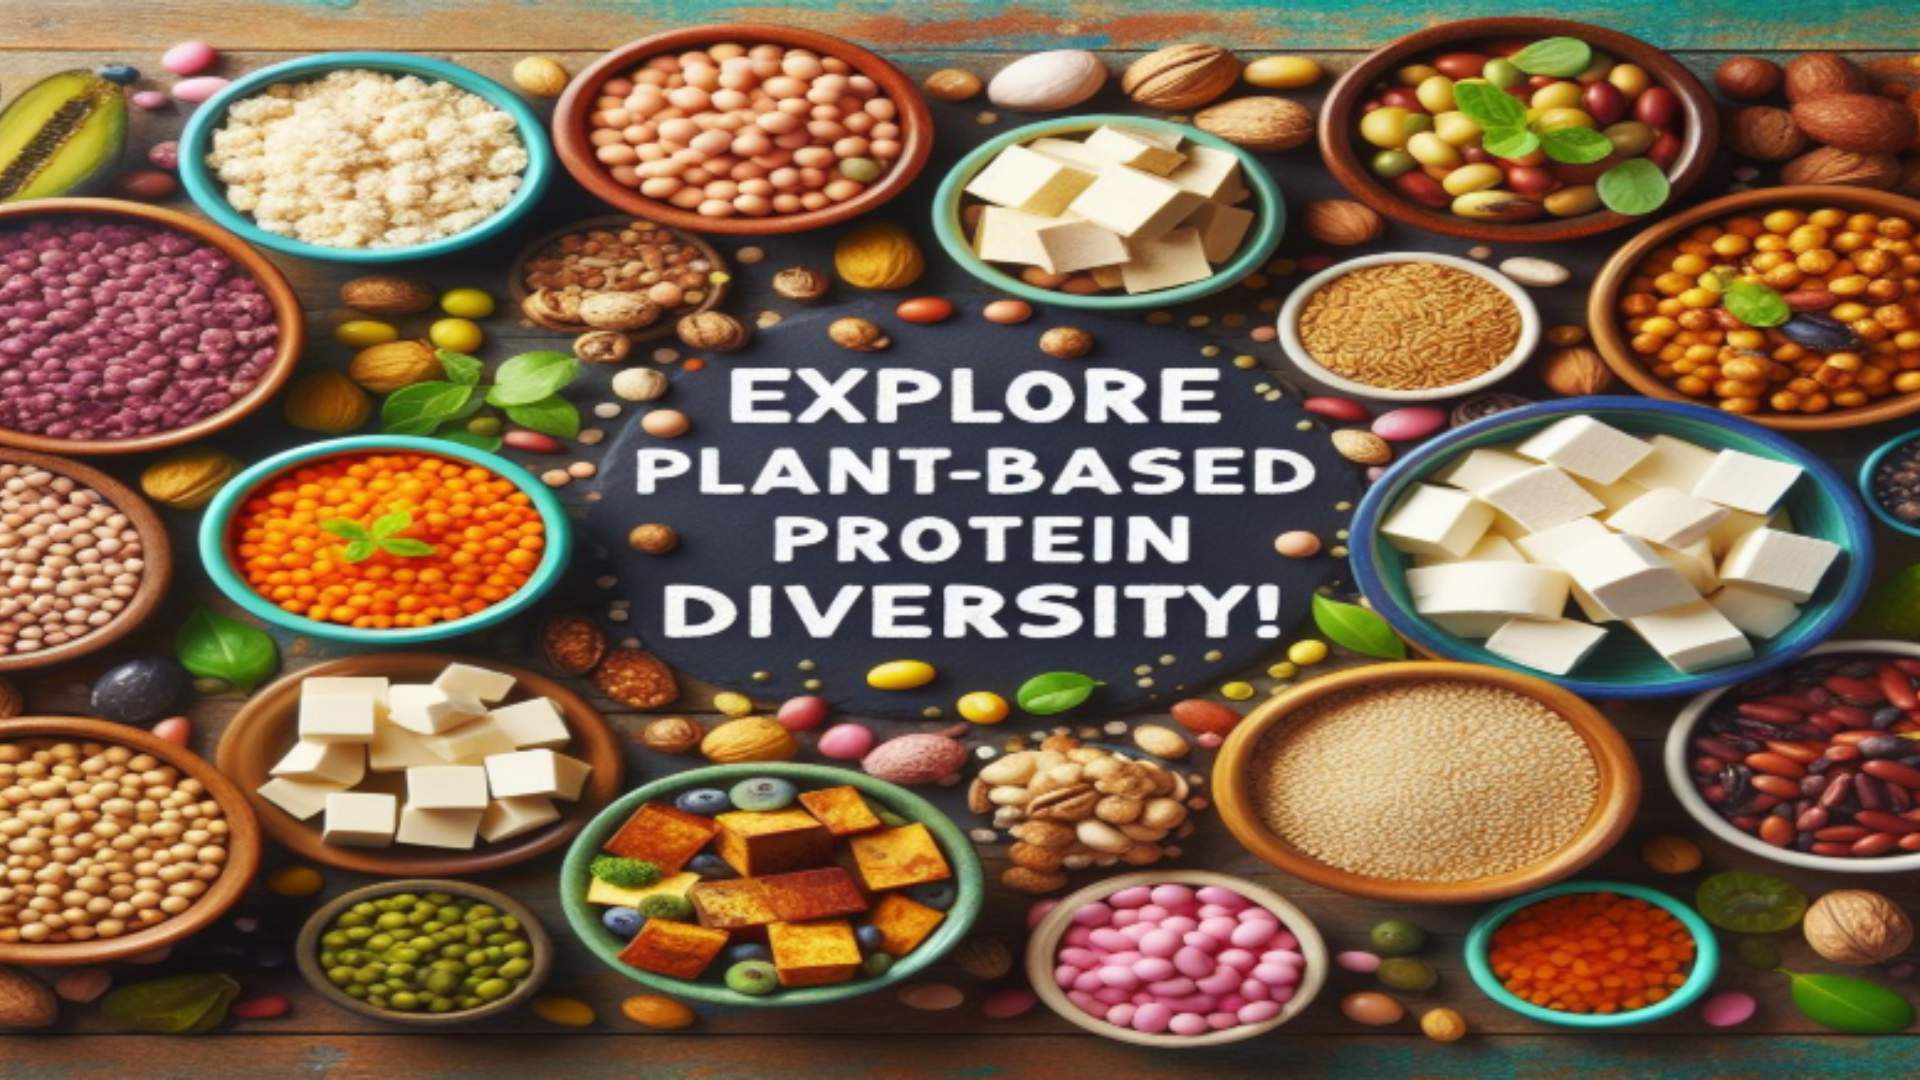 Discover a variety of plant-based protein sources to enhance your diet and boost your nutrition. From legumes to nuts, explore delicious options for a healthier lifestyle.